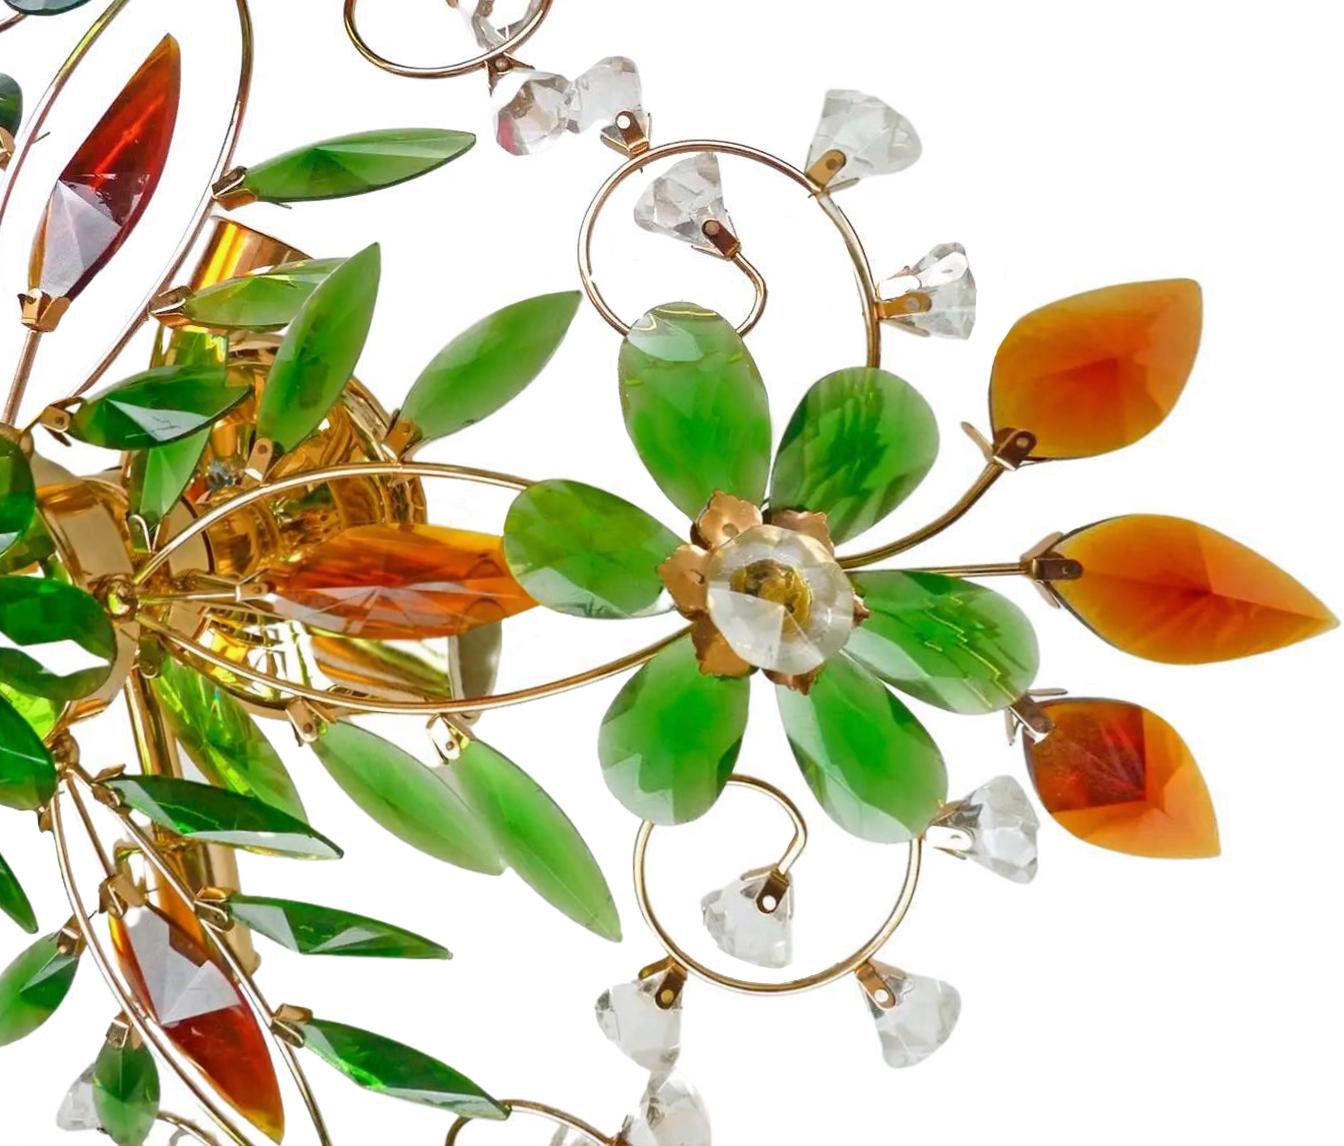 Luxury French multicolored flower flushmount in amber and green crystal glass, gilt brass chandelier.
Dimensions: Diameter 29.5 in/ 75 cm.
Height 10 in/ 25 cm.
5-light bulbs E 14/ Good working condition.
Weight: 5 Kg/ 12 lb.
Assembly